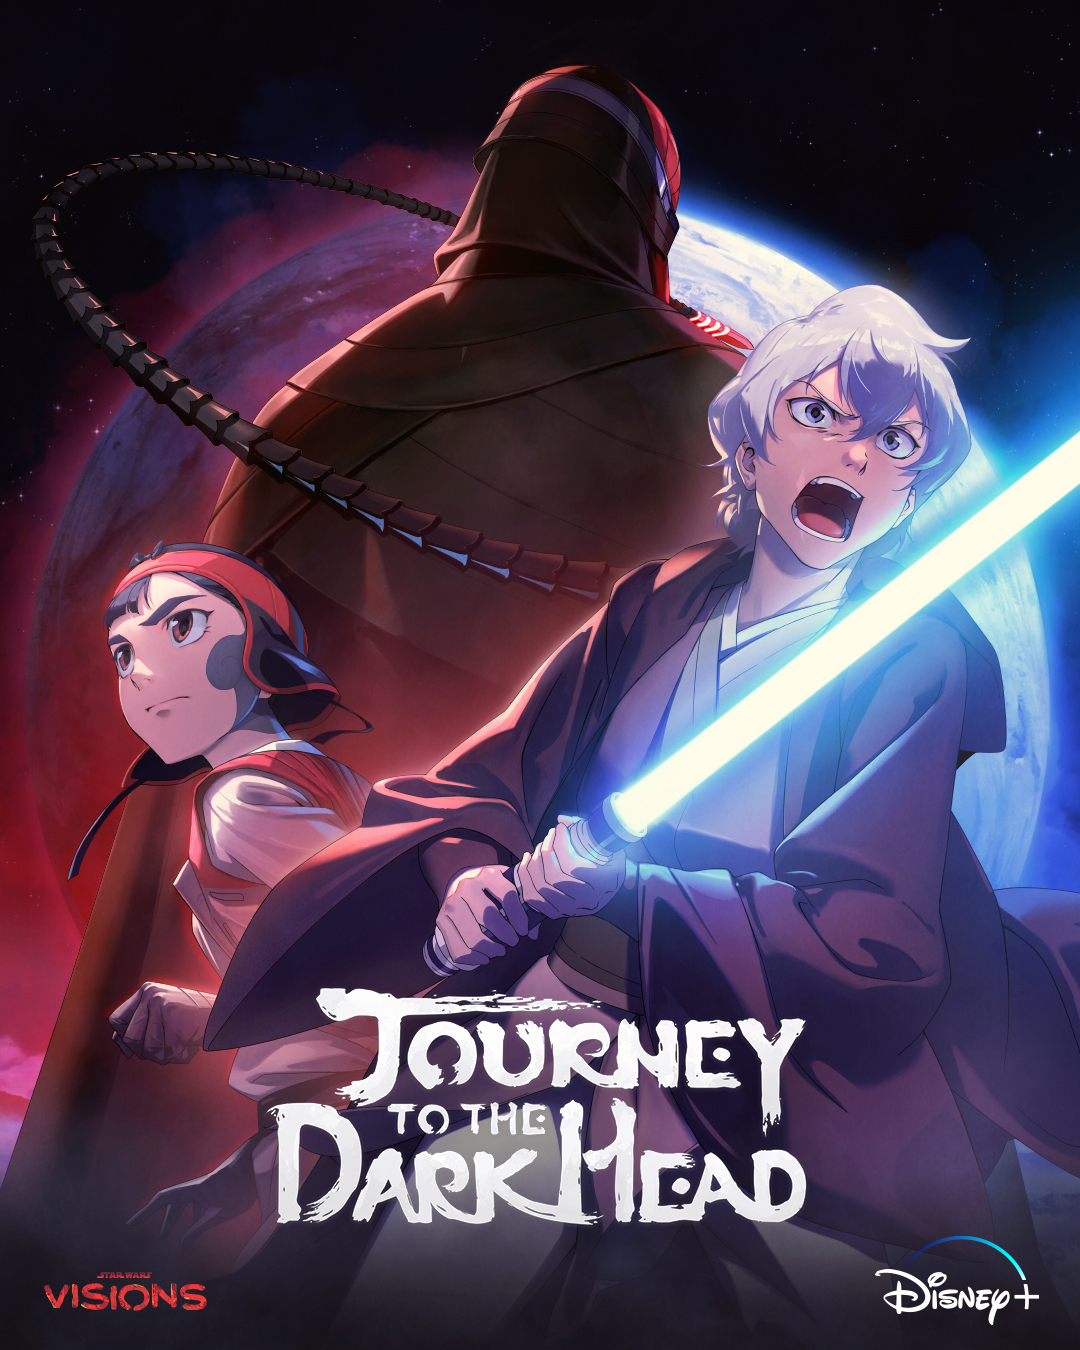 STAR WARS: VISIONS Journey to the Dark Head